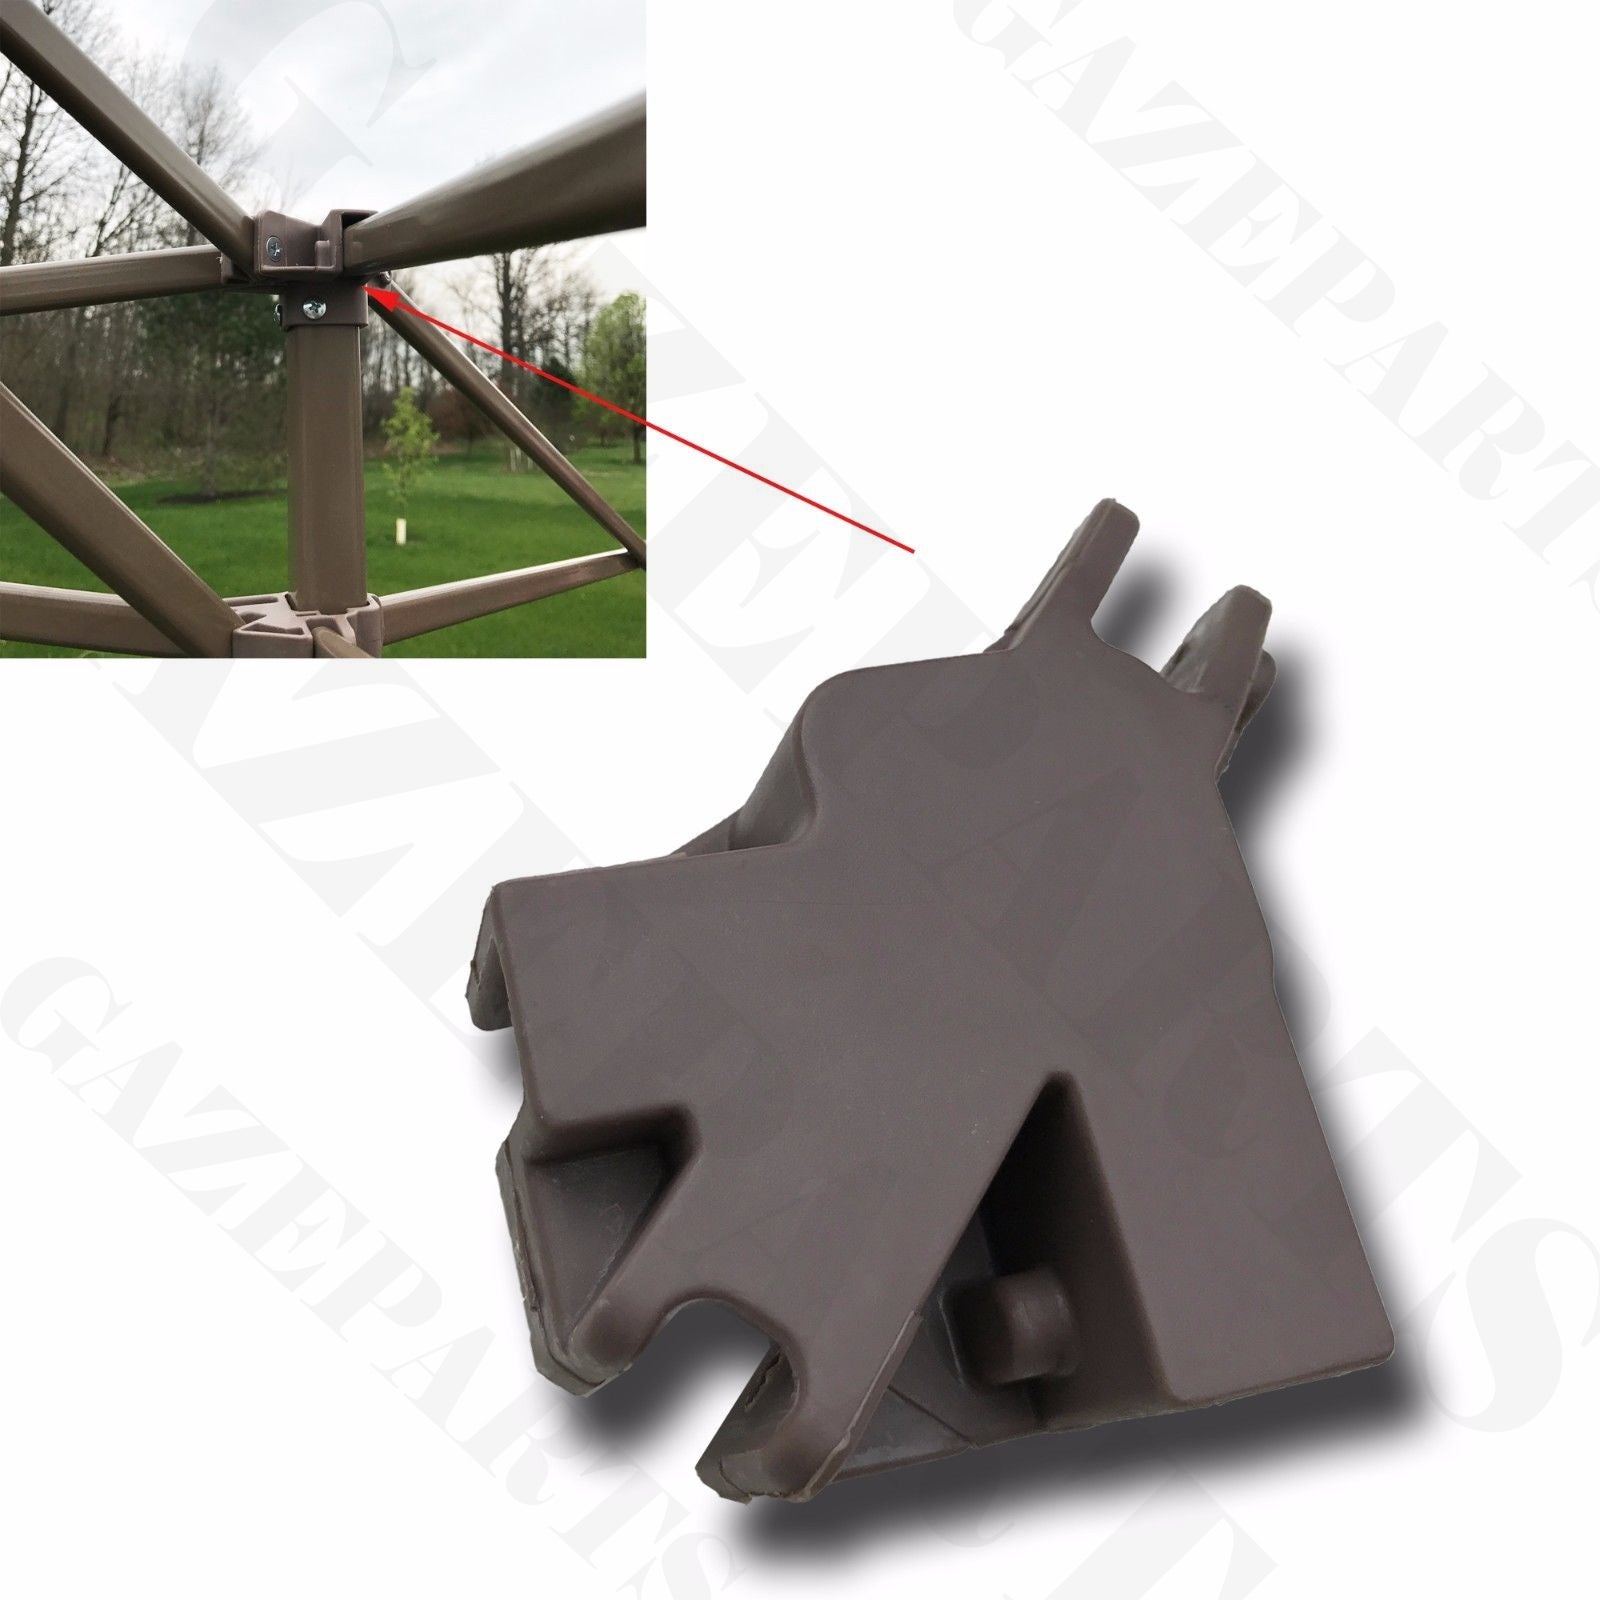 Featured here is the Leg Bracket CAP Connector Replacement Part for the Ozark Trail and Chapter 13 x 13 Pagoda Canopy Gazebo. This part plays a pivotal role in ensuring the strength and stability of your canopy, making it a necessary accessory for outdoor events.